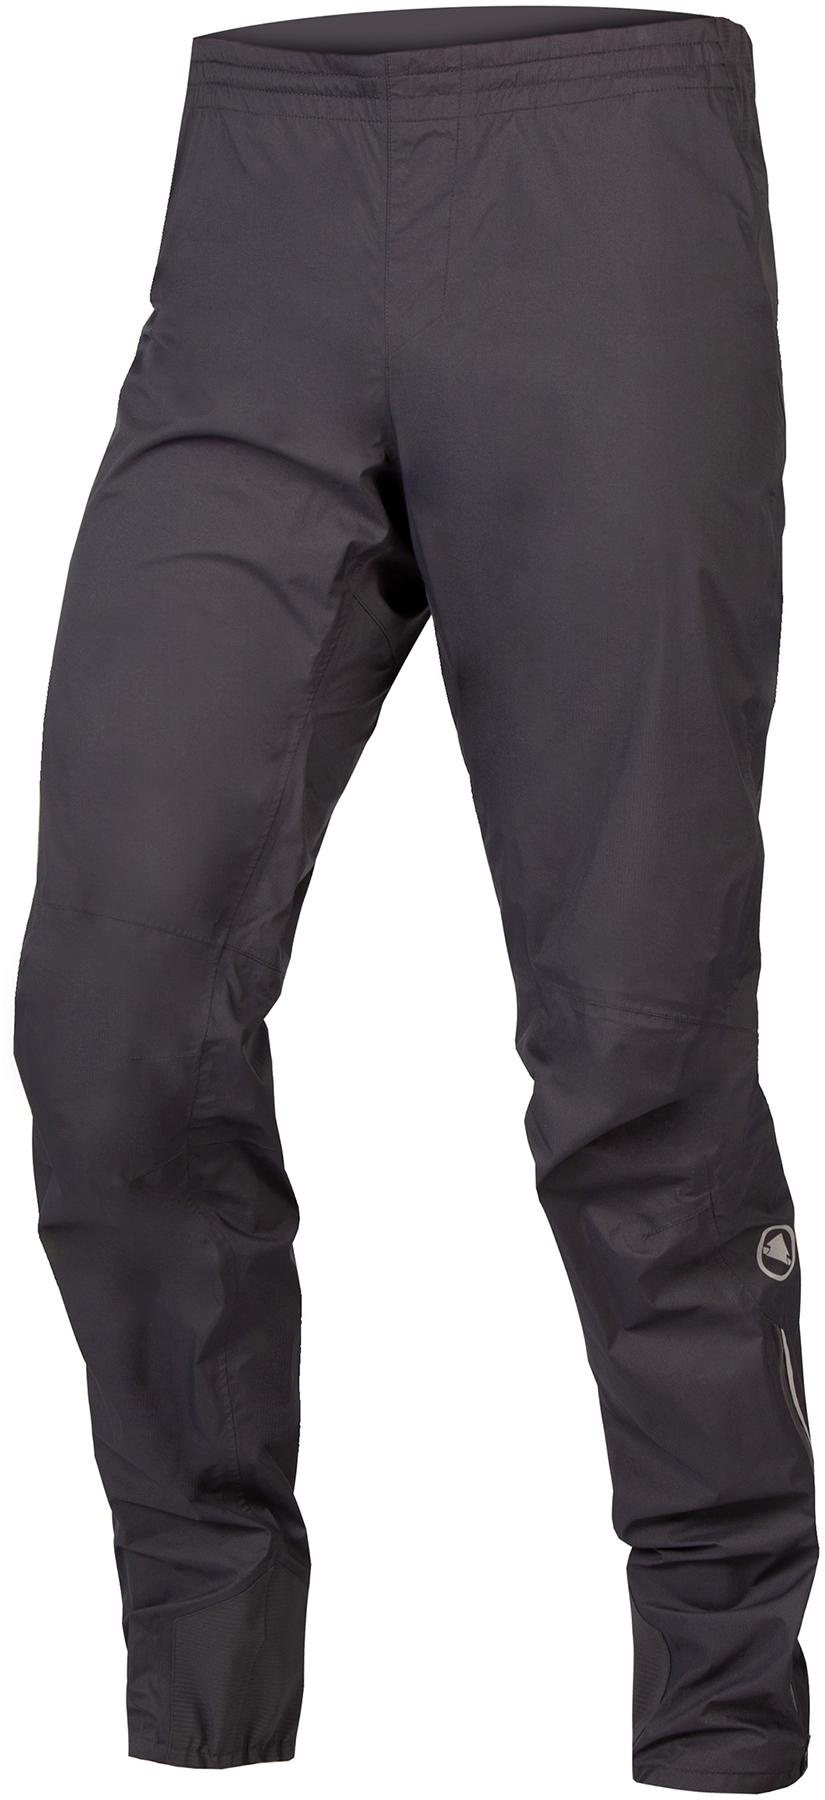 Endura Gv500 Waterproof Cycling Trousers  Anthracite